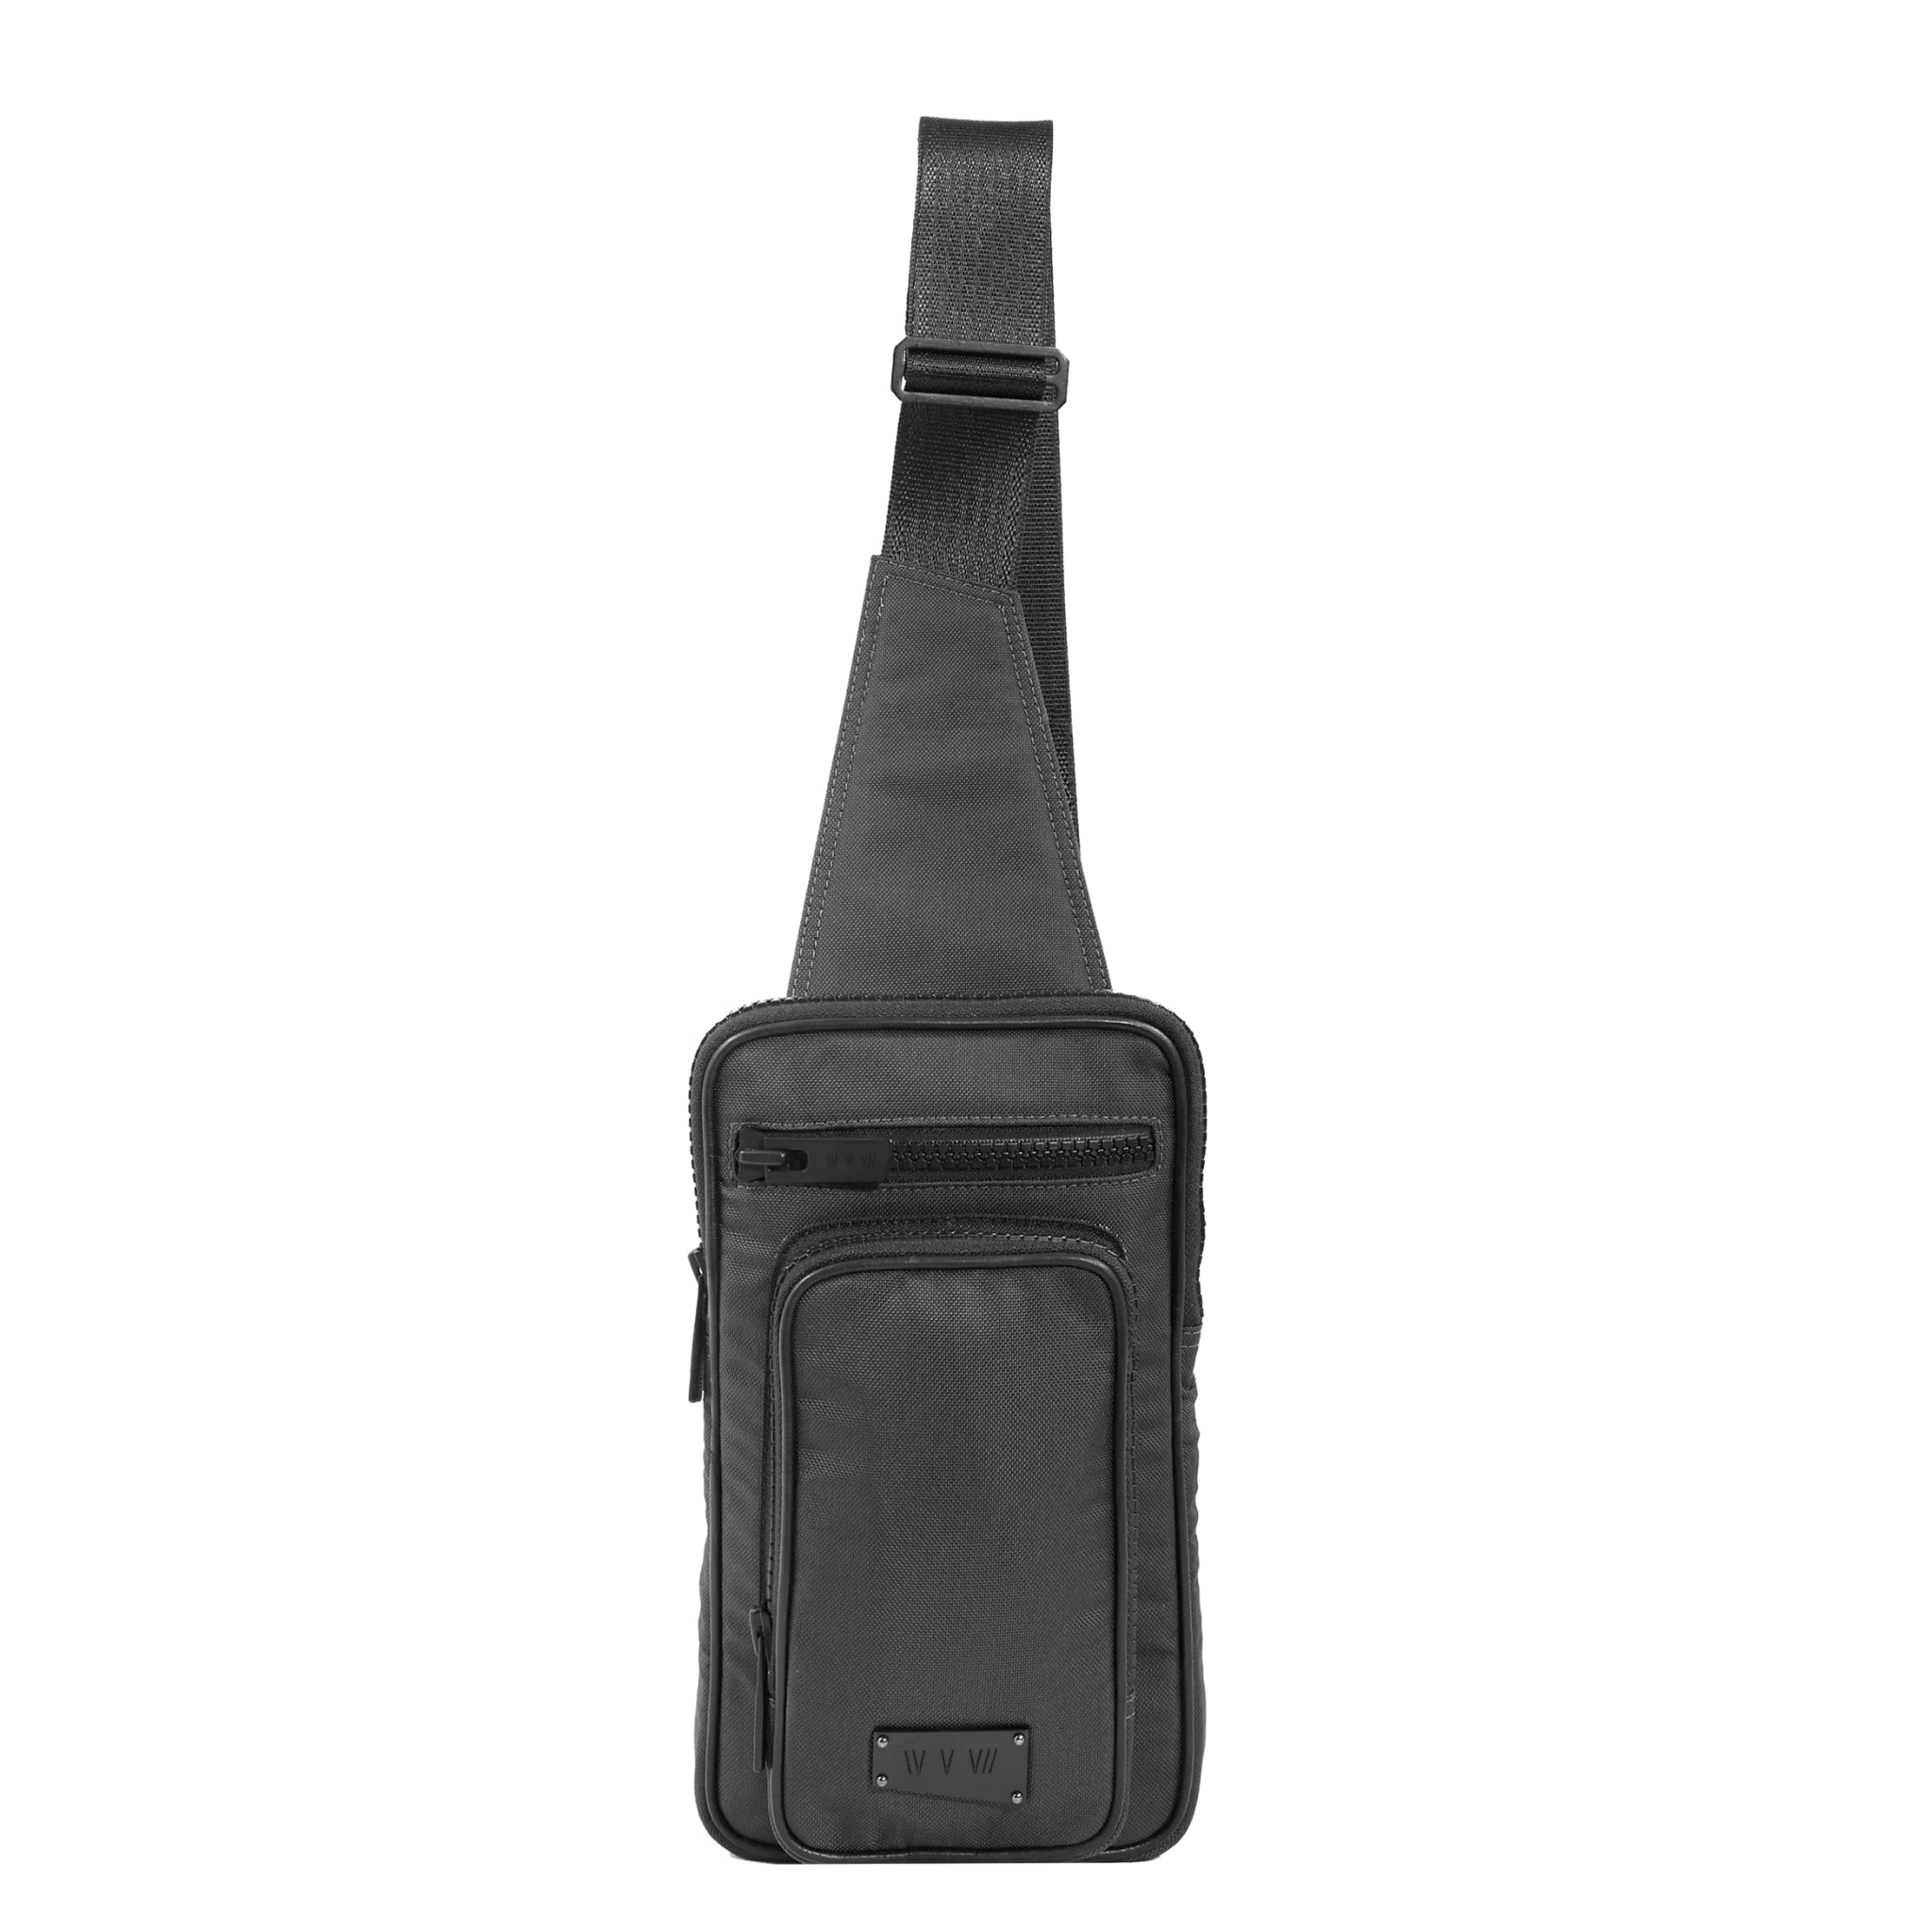 Face view of a utilitarian style sling in graphite upcycled nylon material on a white background.